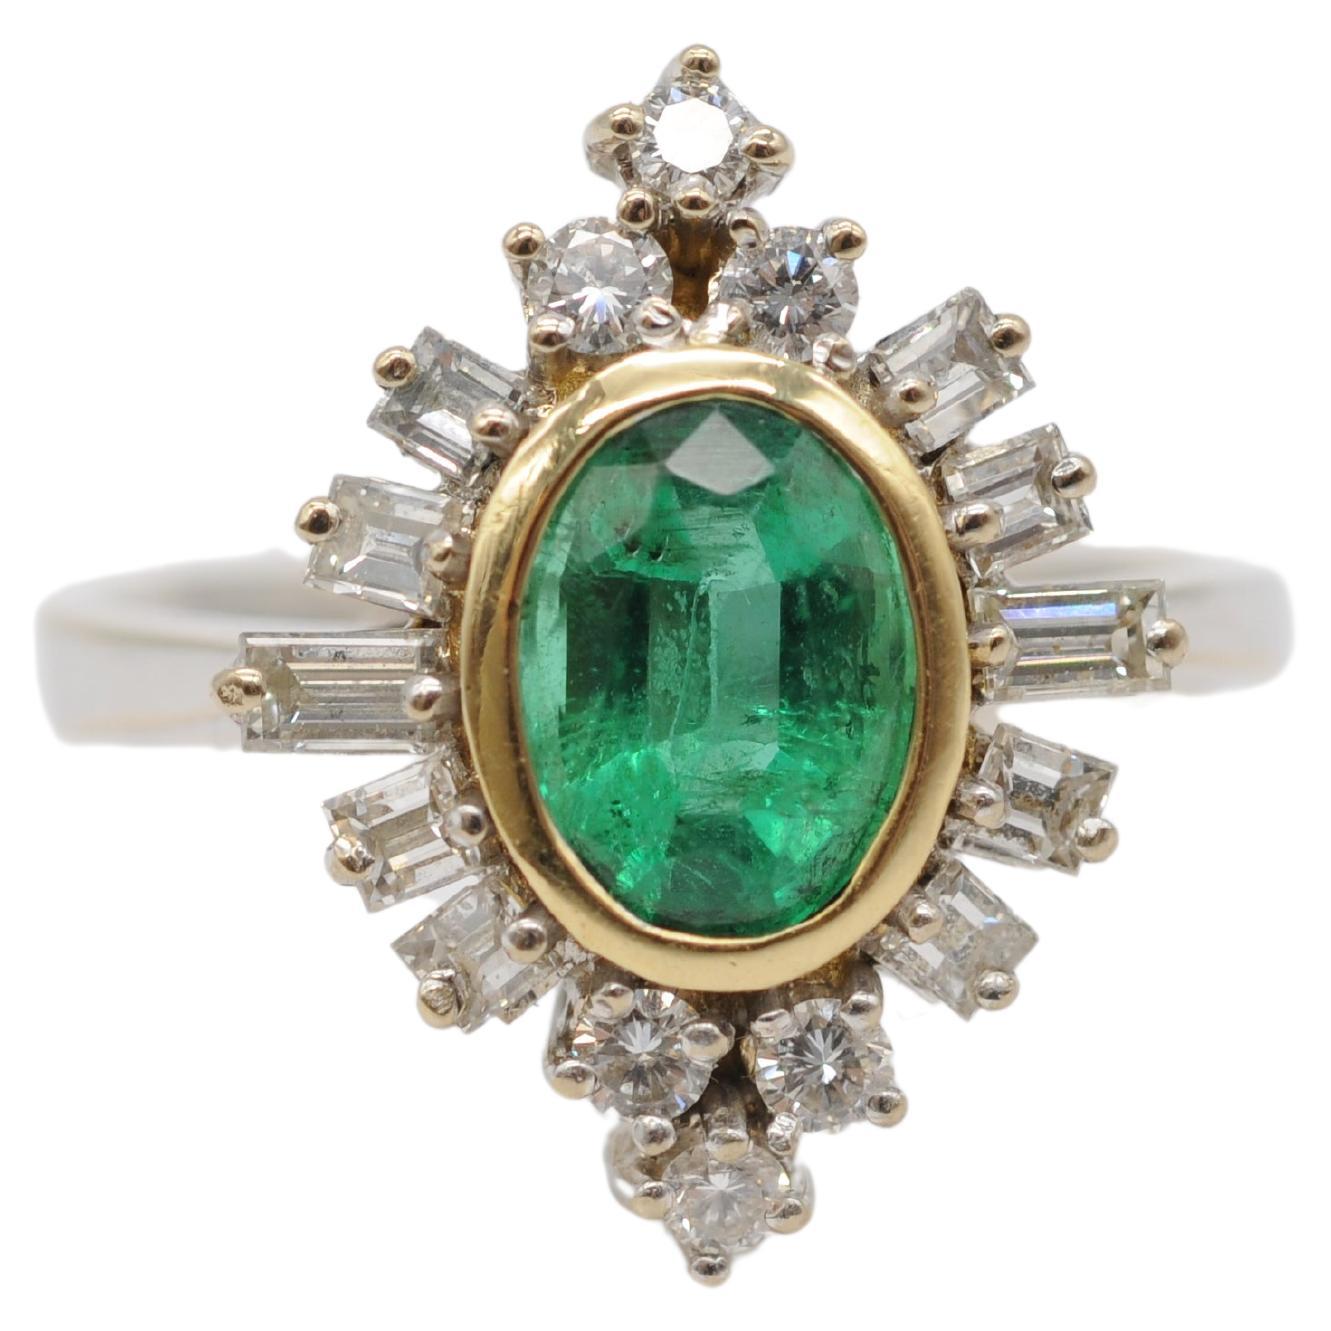 Behold the breathtaking beauty of this 18k white gold ring adorned with an exquisite Colombian emerald approx 1.25ct and sparkling diamonds. The centerpiece of this majestic piece is the oval-cut Colombian emerald, nestled within a yellow gold